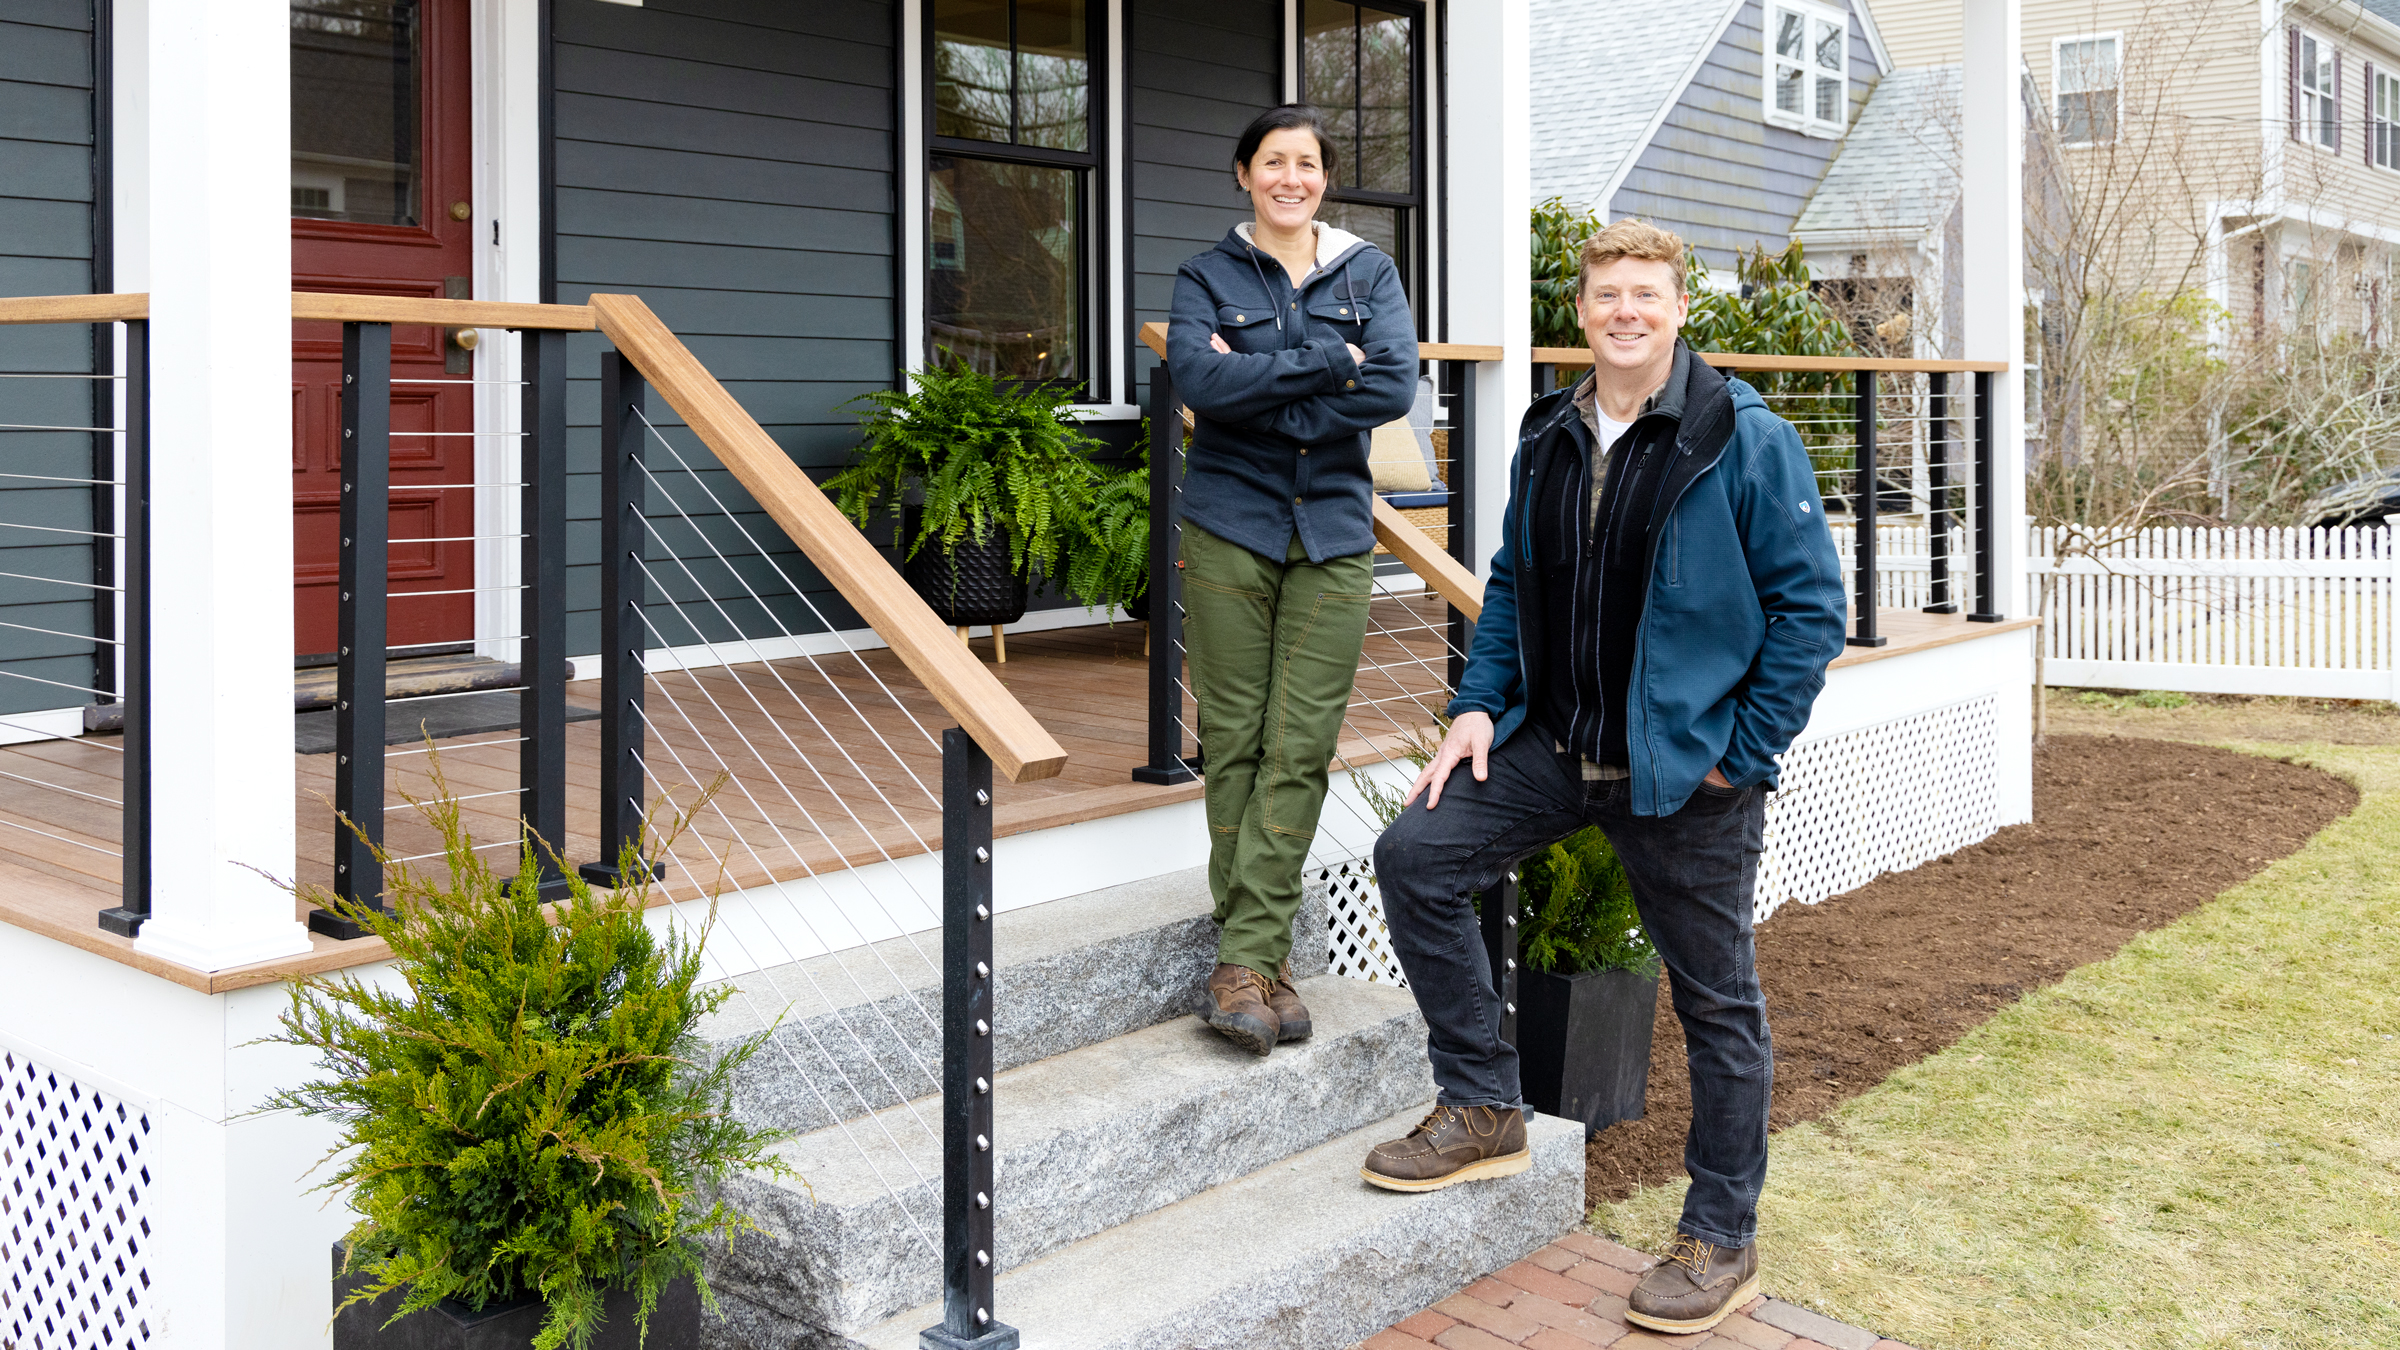 S43 E26, Jenn Nawada and Kevin O’Connor on the West Roxbury front porch stairs